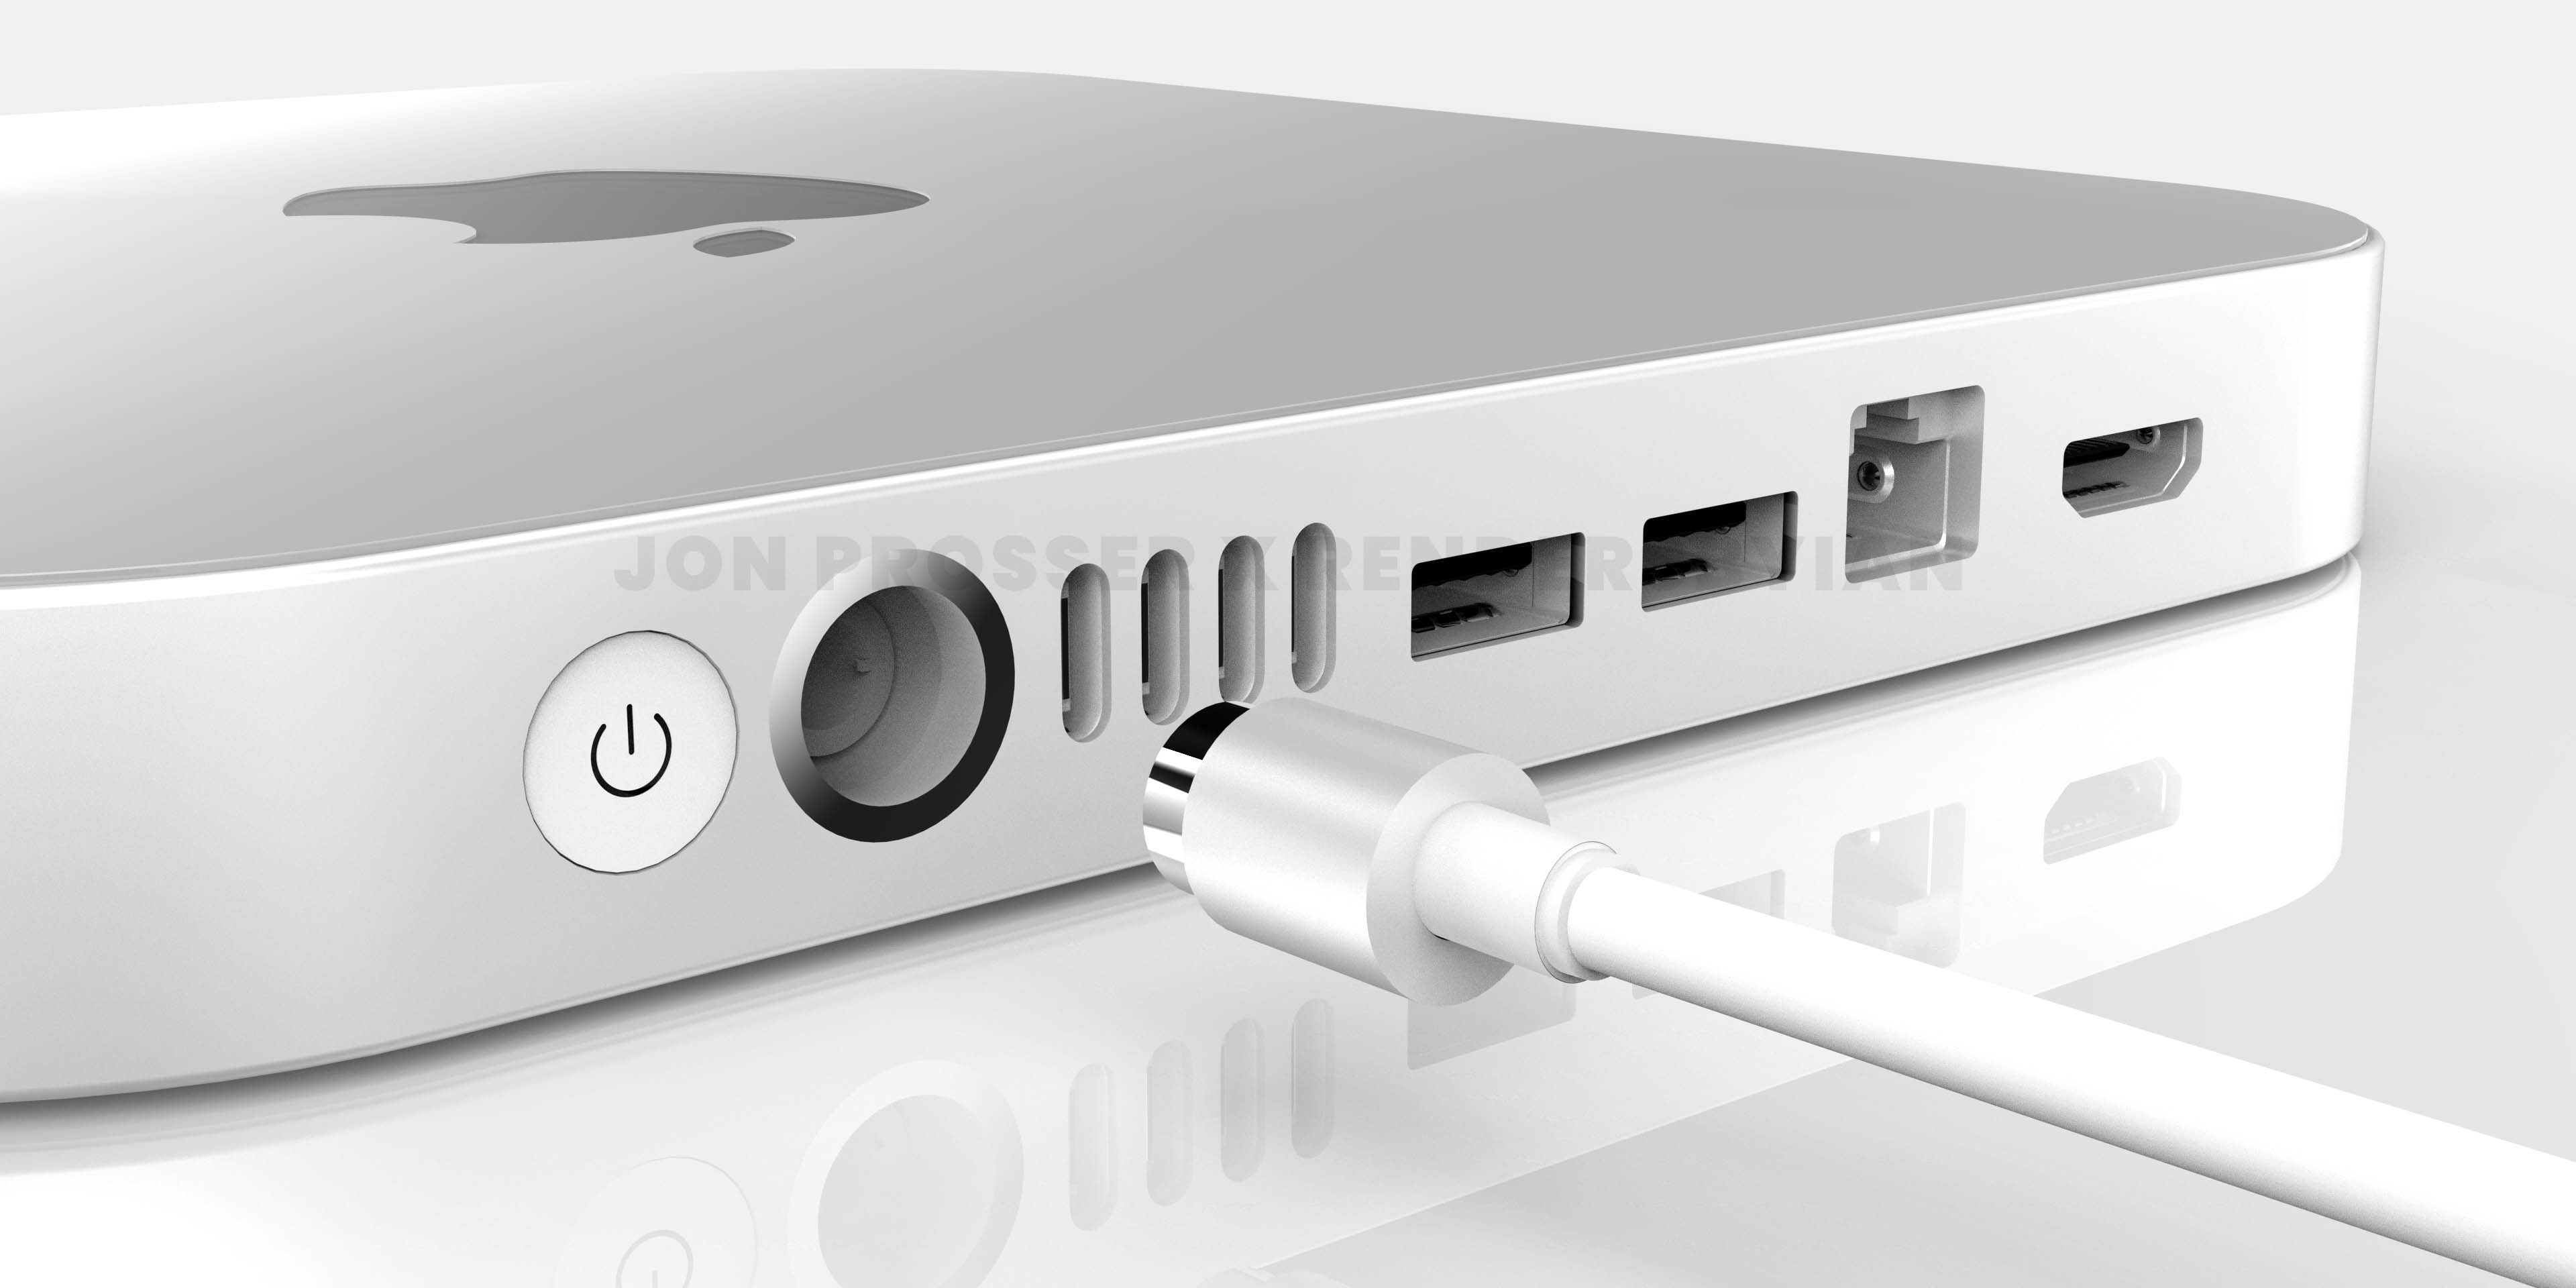 A new Mac mini could come as soon as next week, here's what we